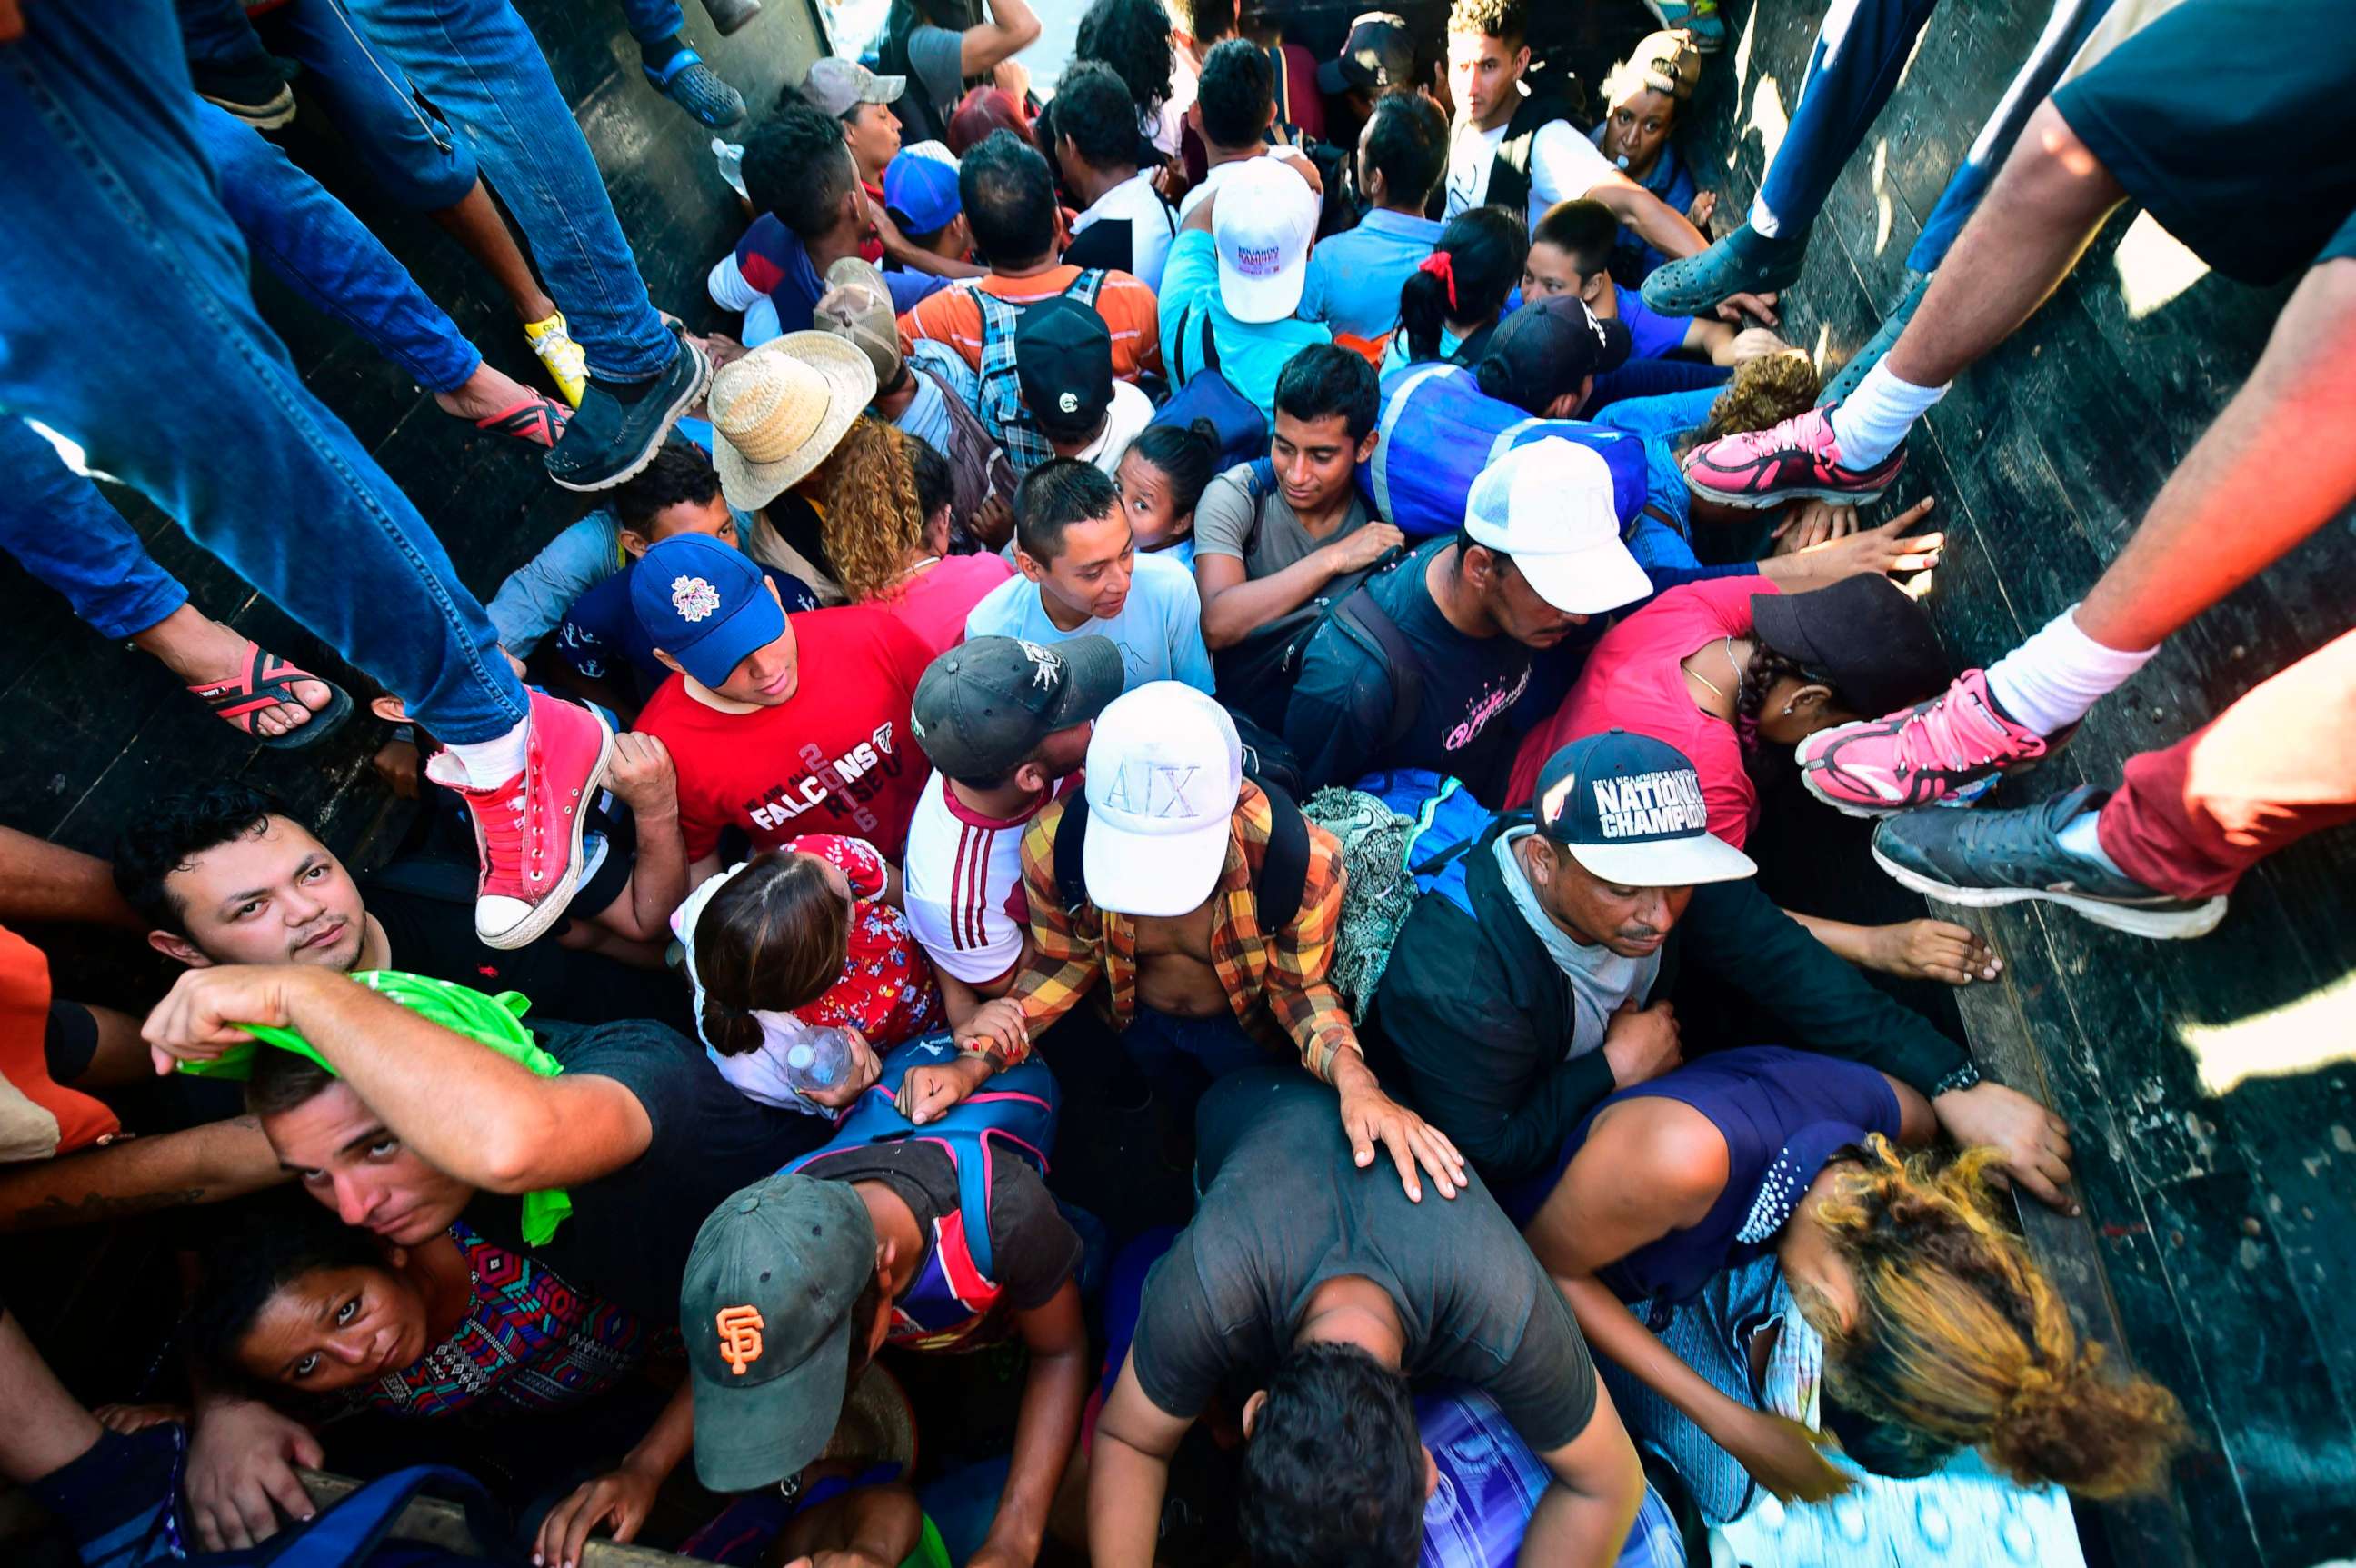 PHOTO: Honduran migrants taking part in a caravan heading to the US, aboard a truck in Metapa on their way to Tapachula, Chiapas state, Mexico on Oct. 22, 2018. 